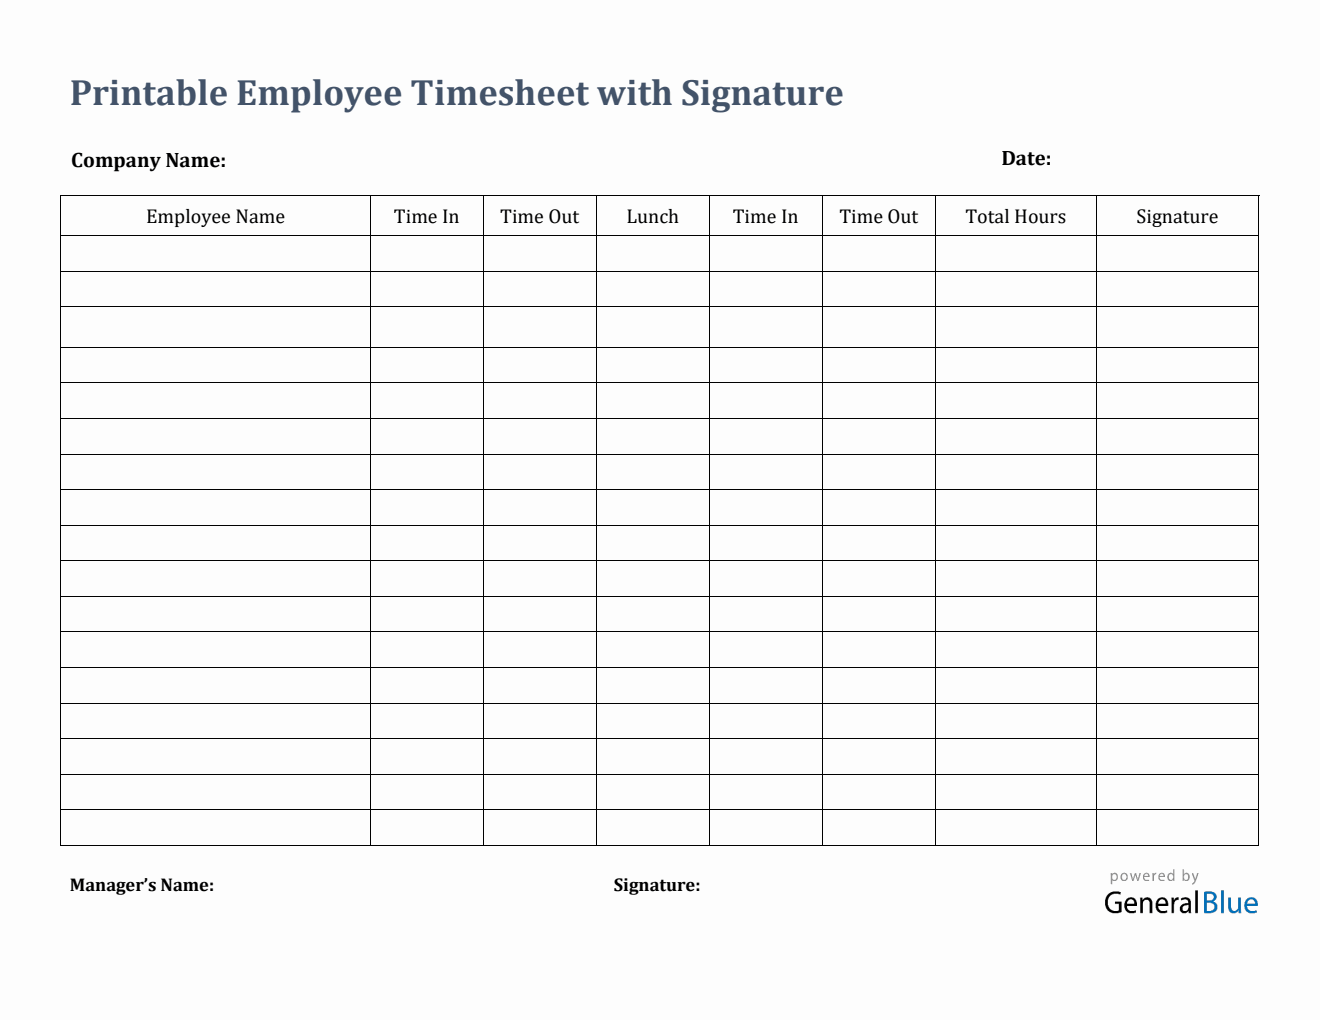 printable-employee-timesheet-with-signature-in-pdf